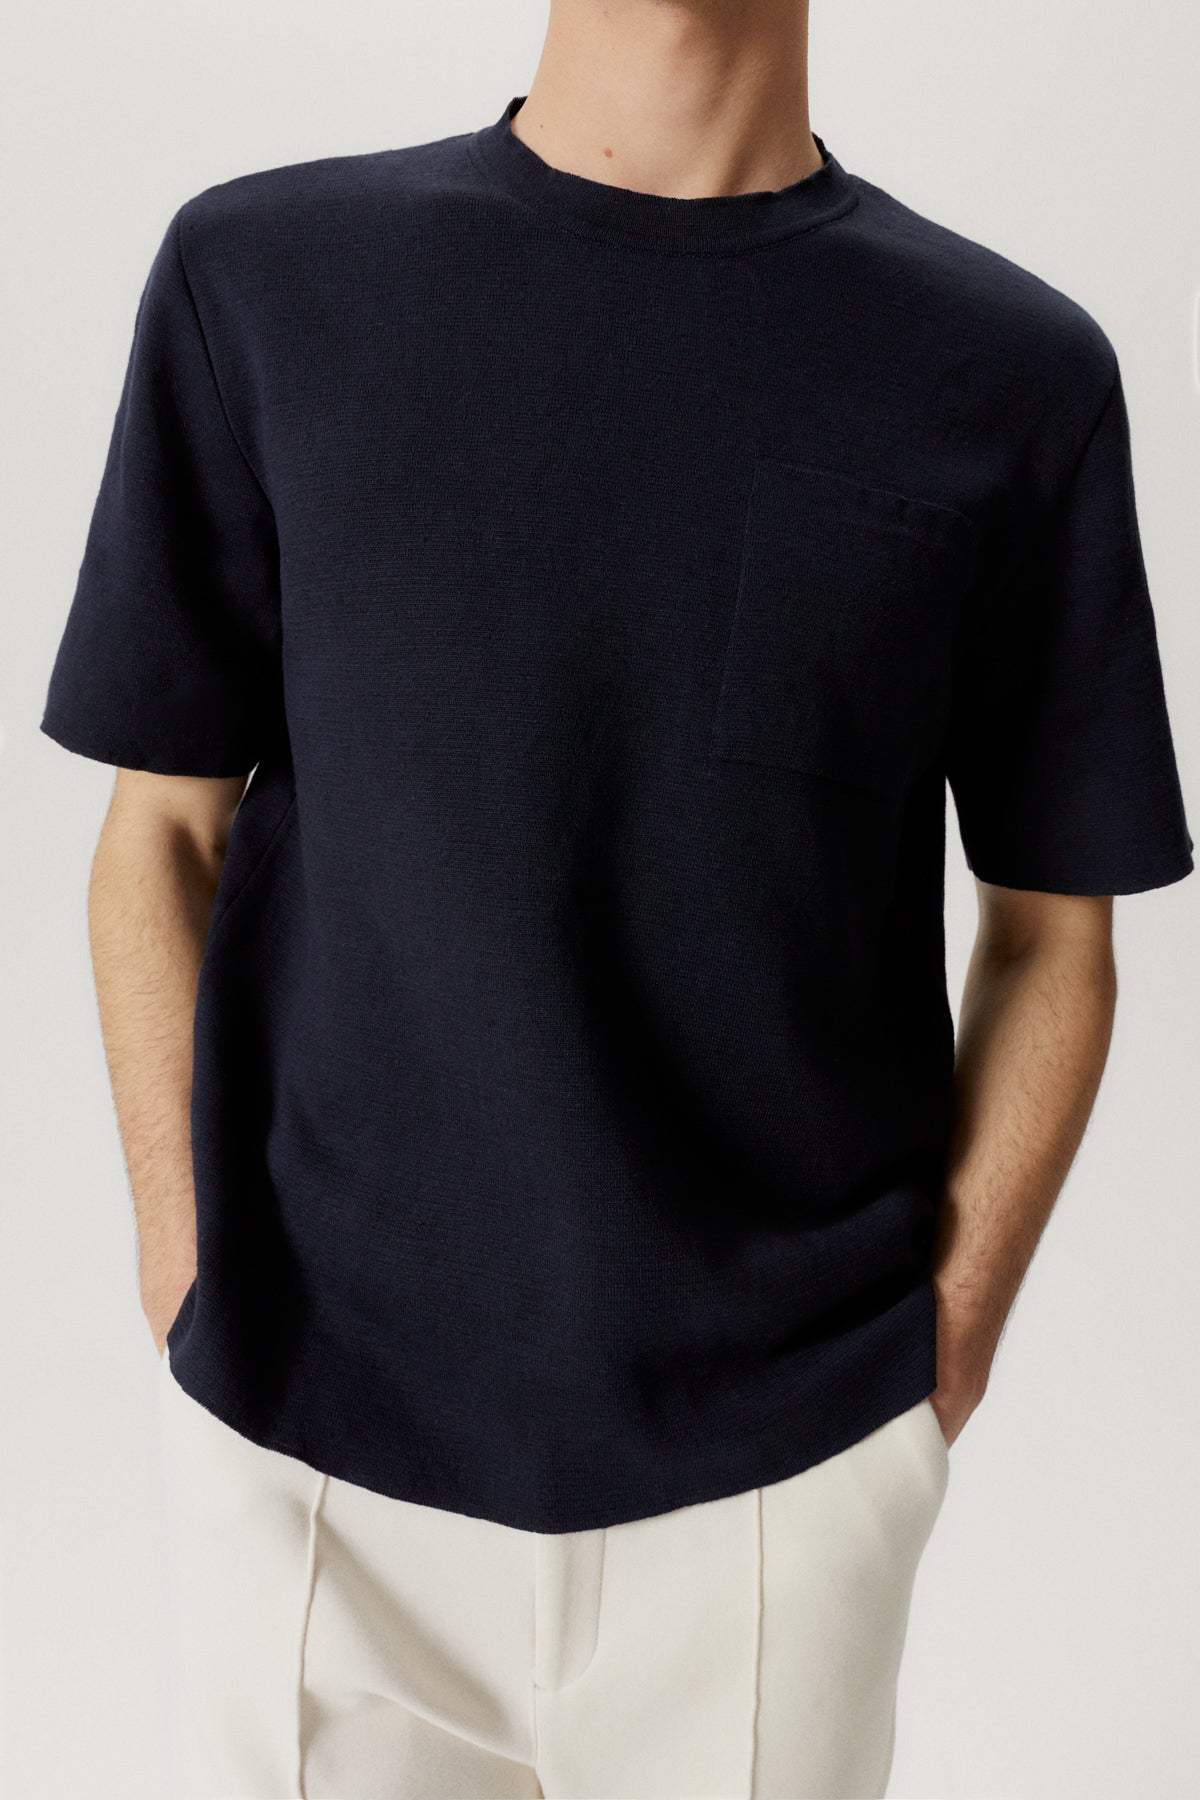 the linen cotton relaxed fit t shirt blue navy